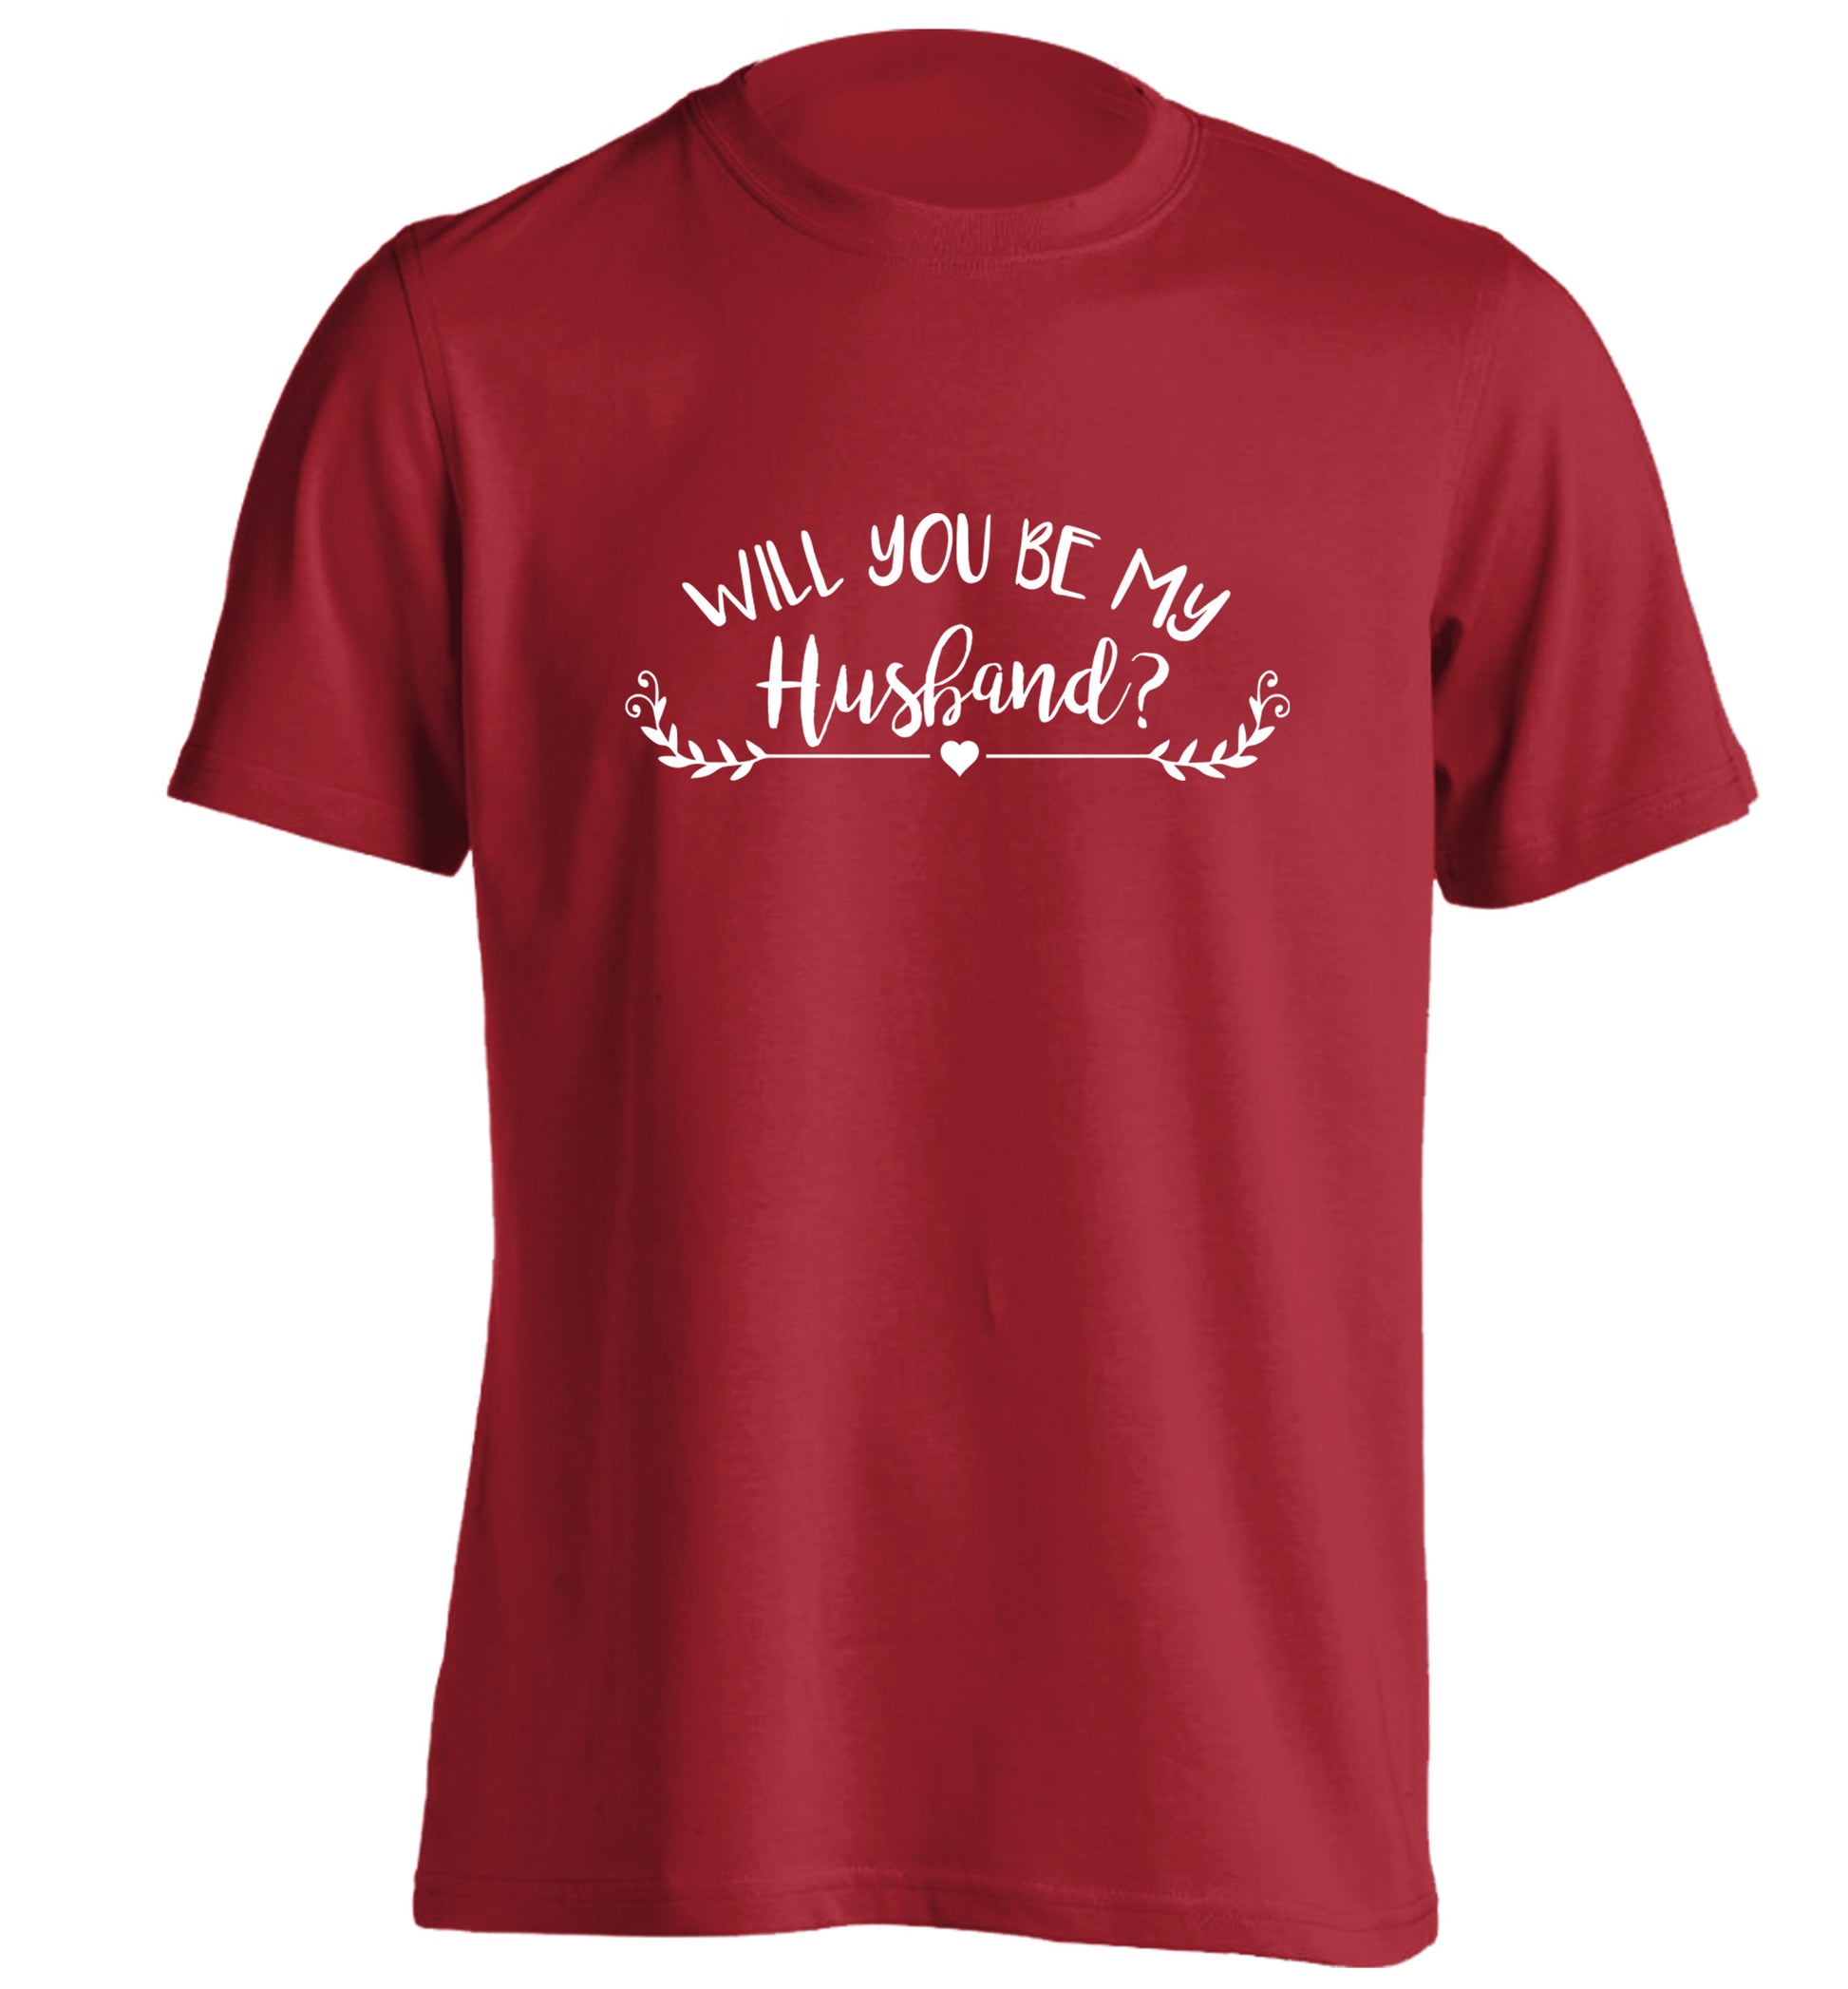 Will you be my husband? adults unisex red Tshirt 2XL